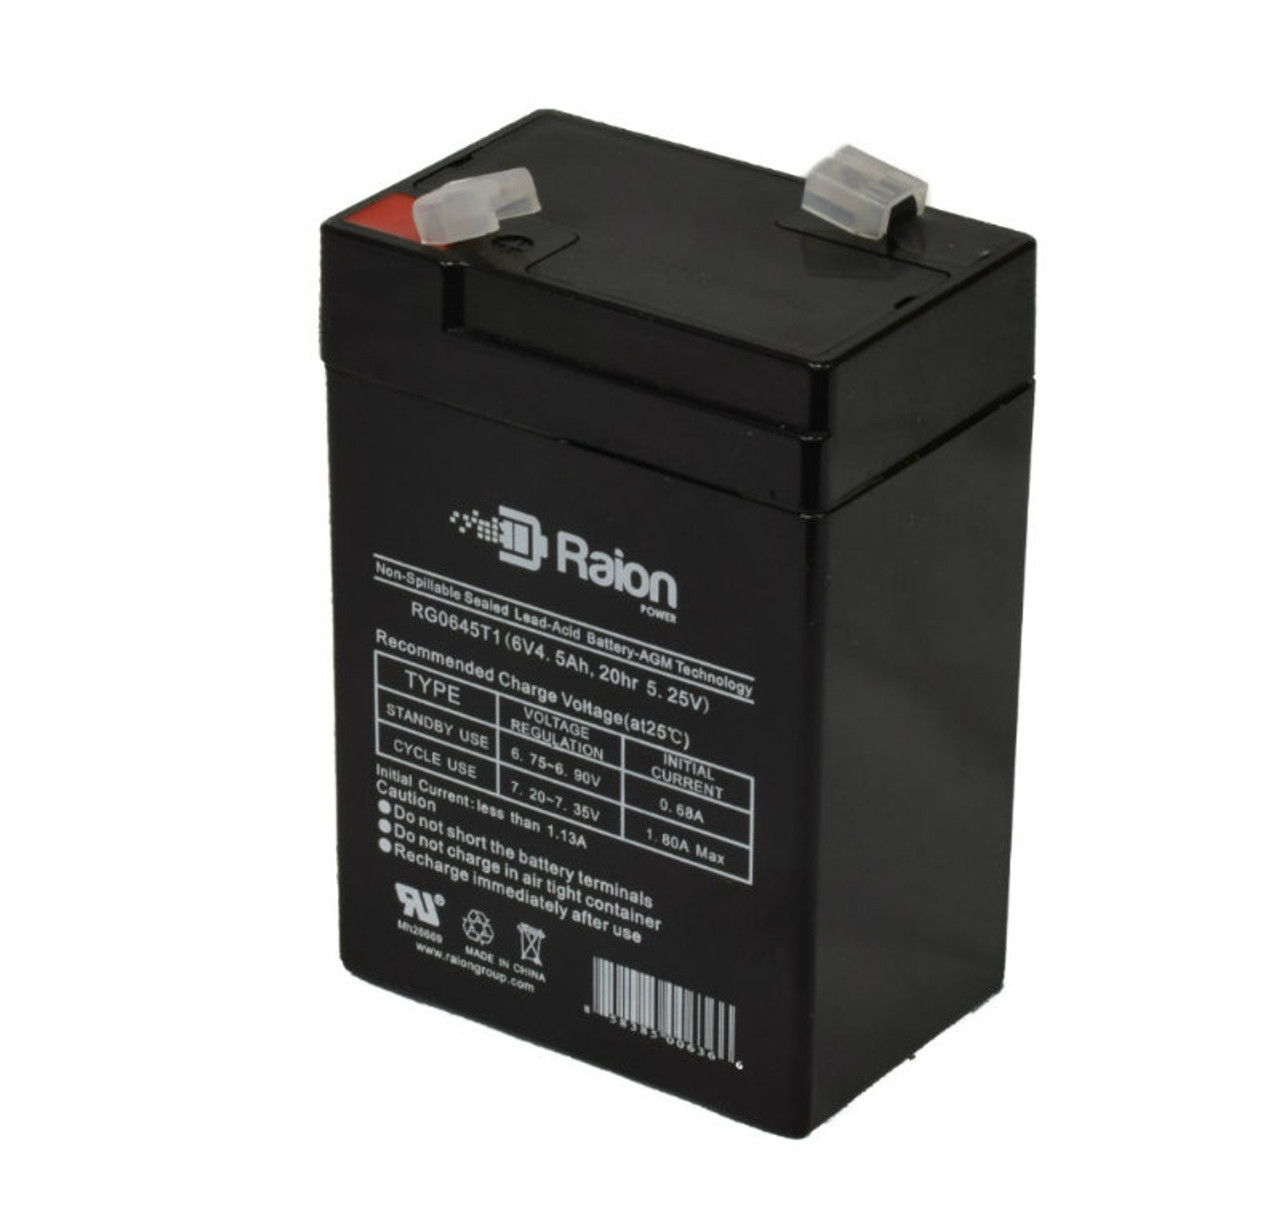 Raion Power RG0645T1 6V 4.5Ah Replacement Battery Cartridge for Mule GC642